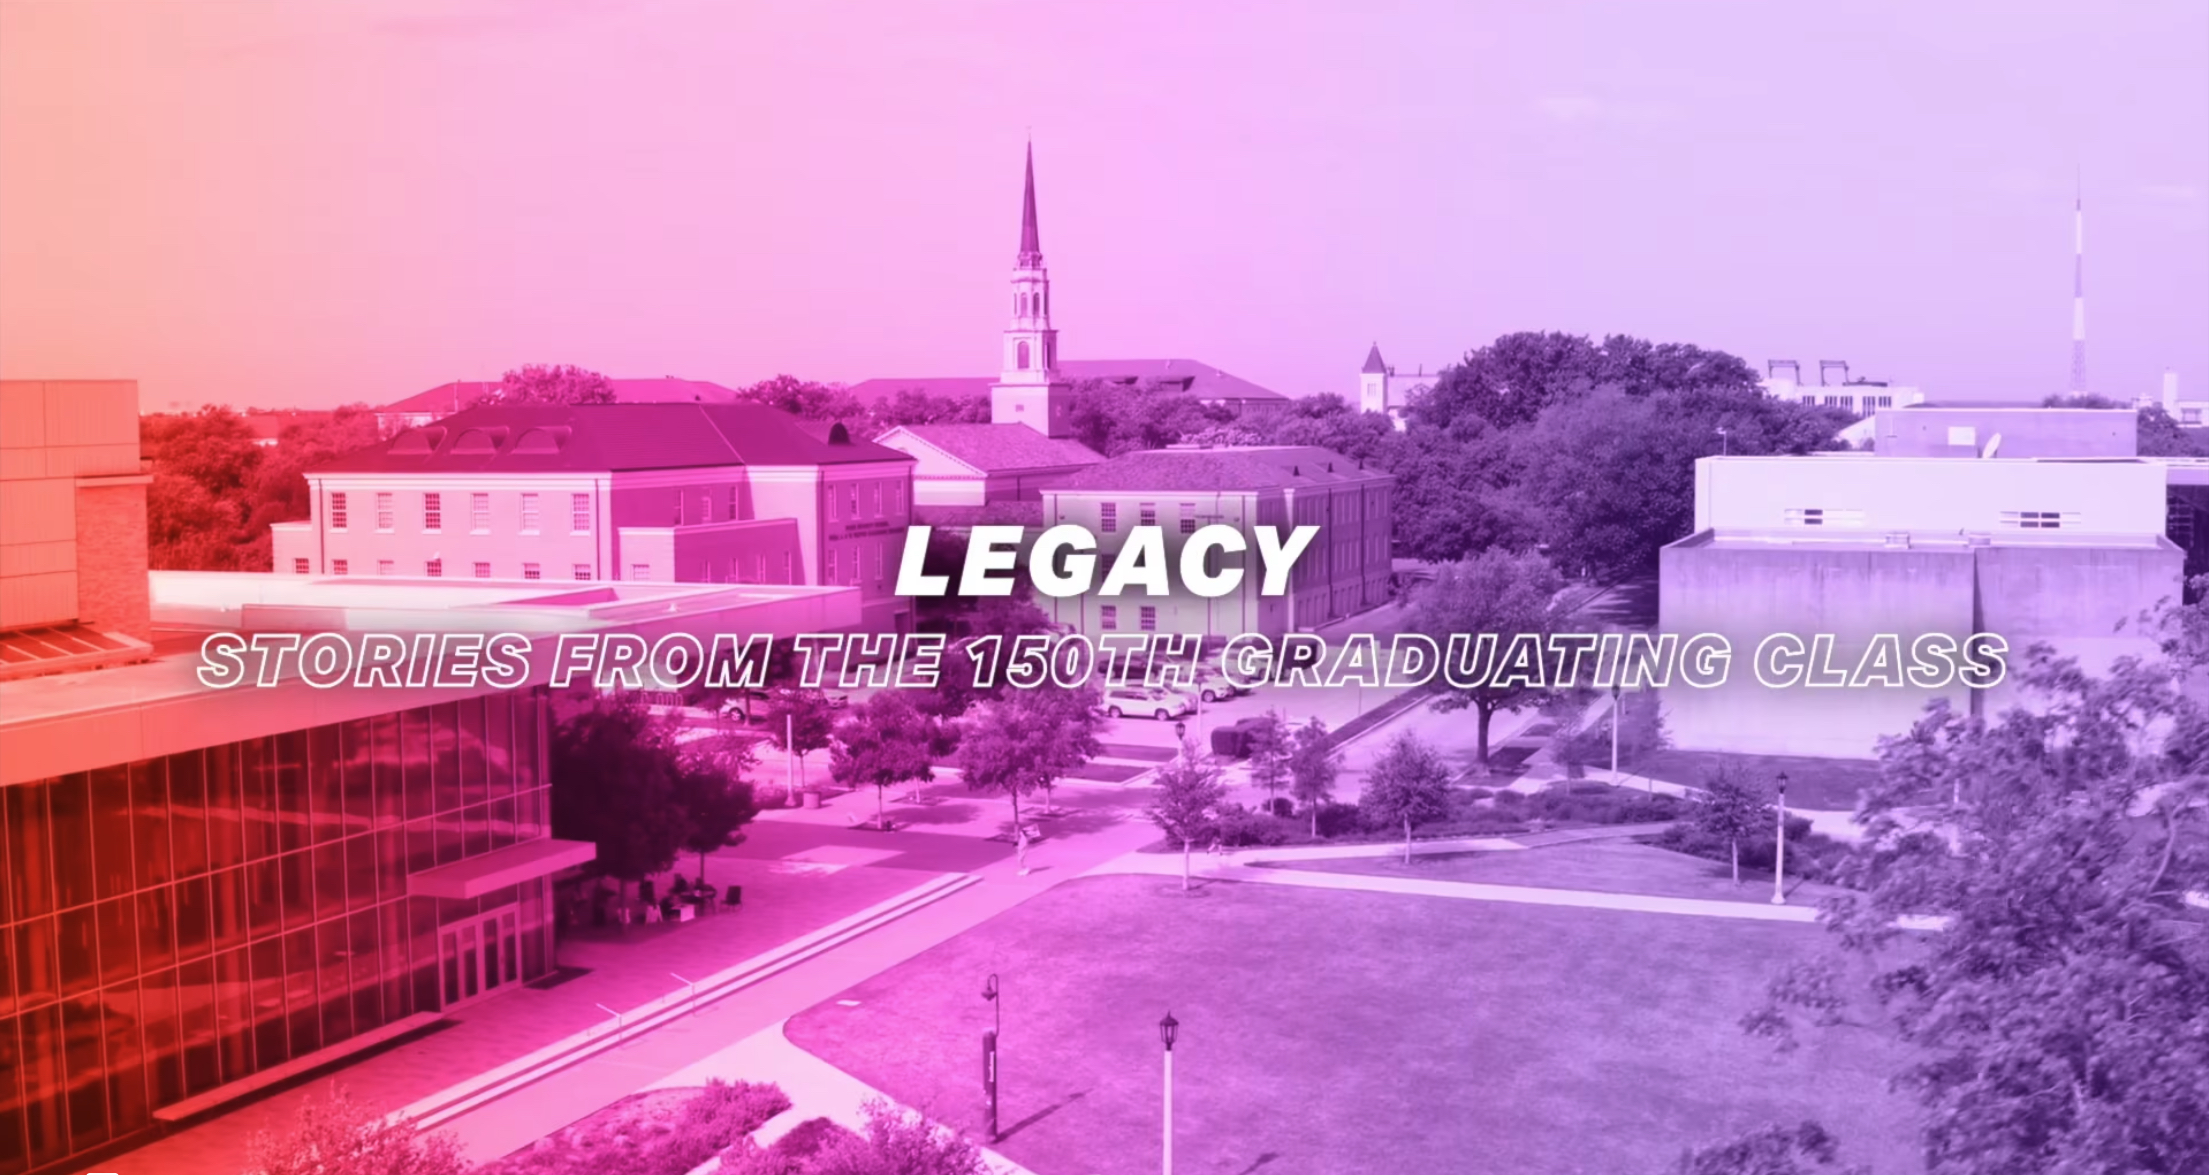 Legacy: Stories from the 150th graduating class